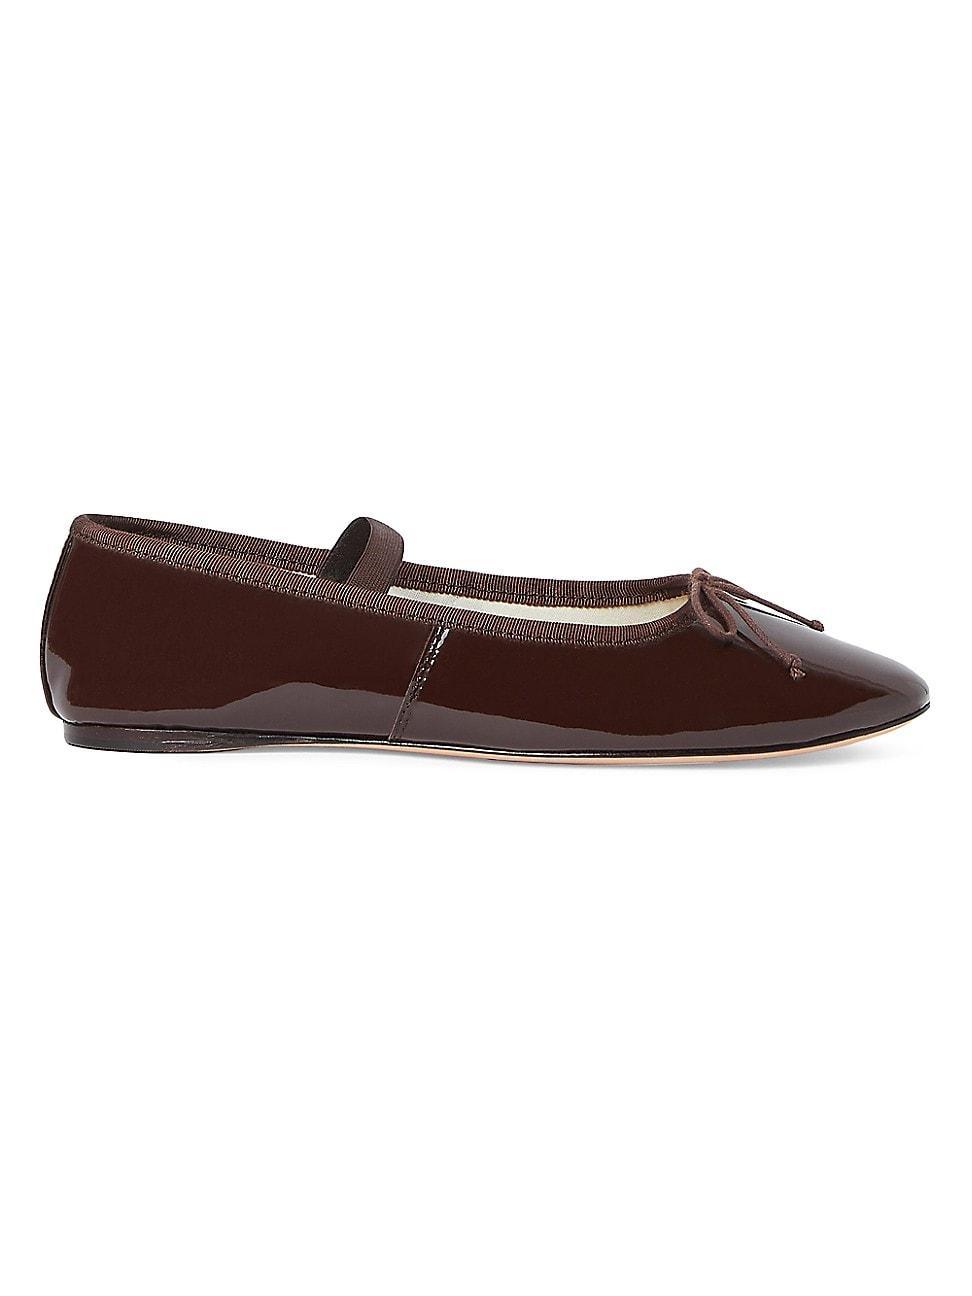 Womens Leonie Patent Leather Ballet Flats Product Image